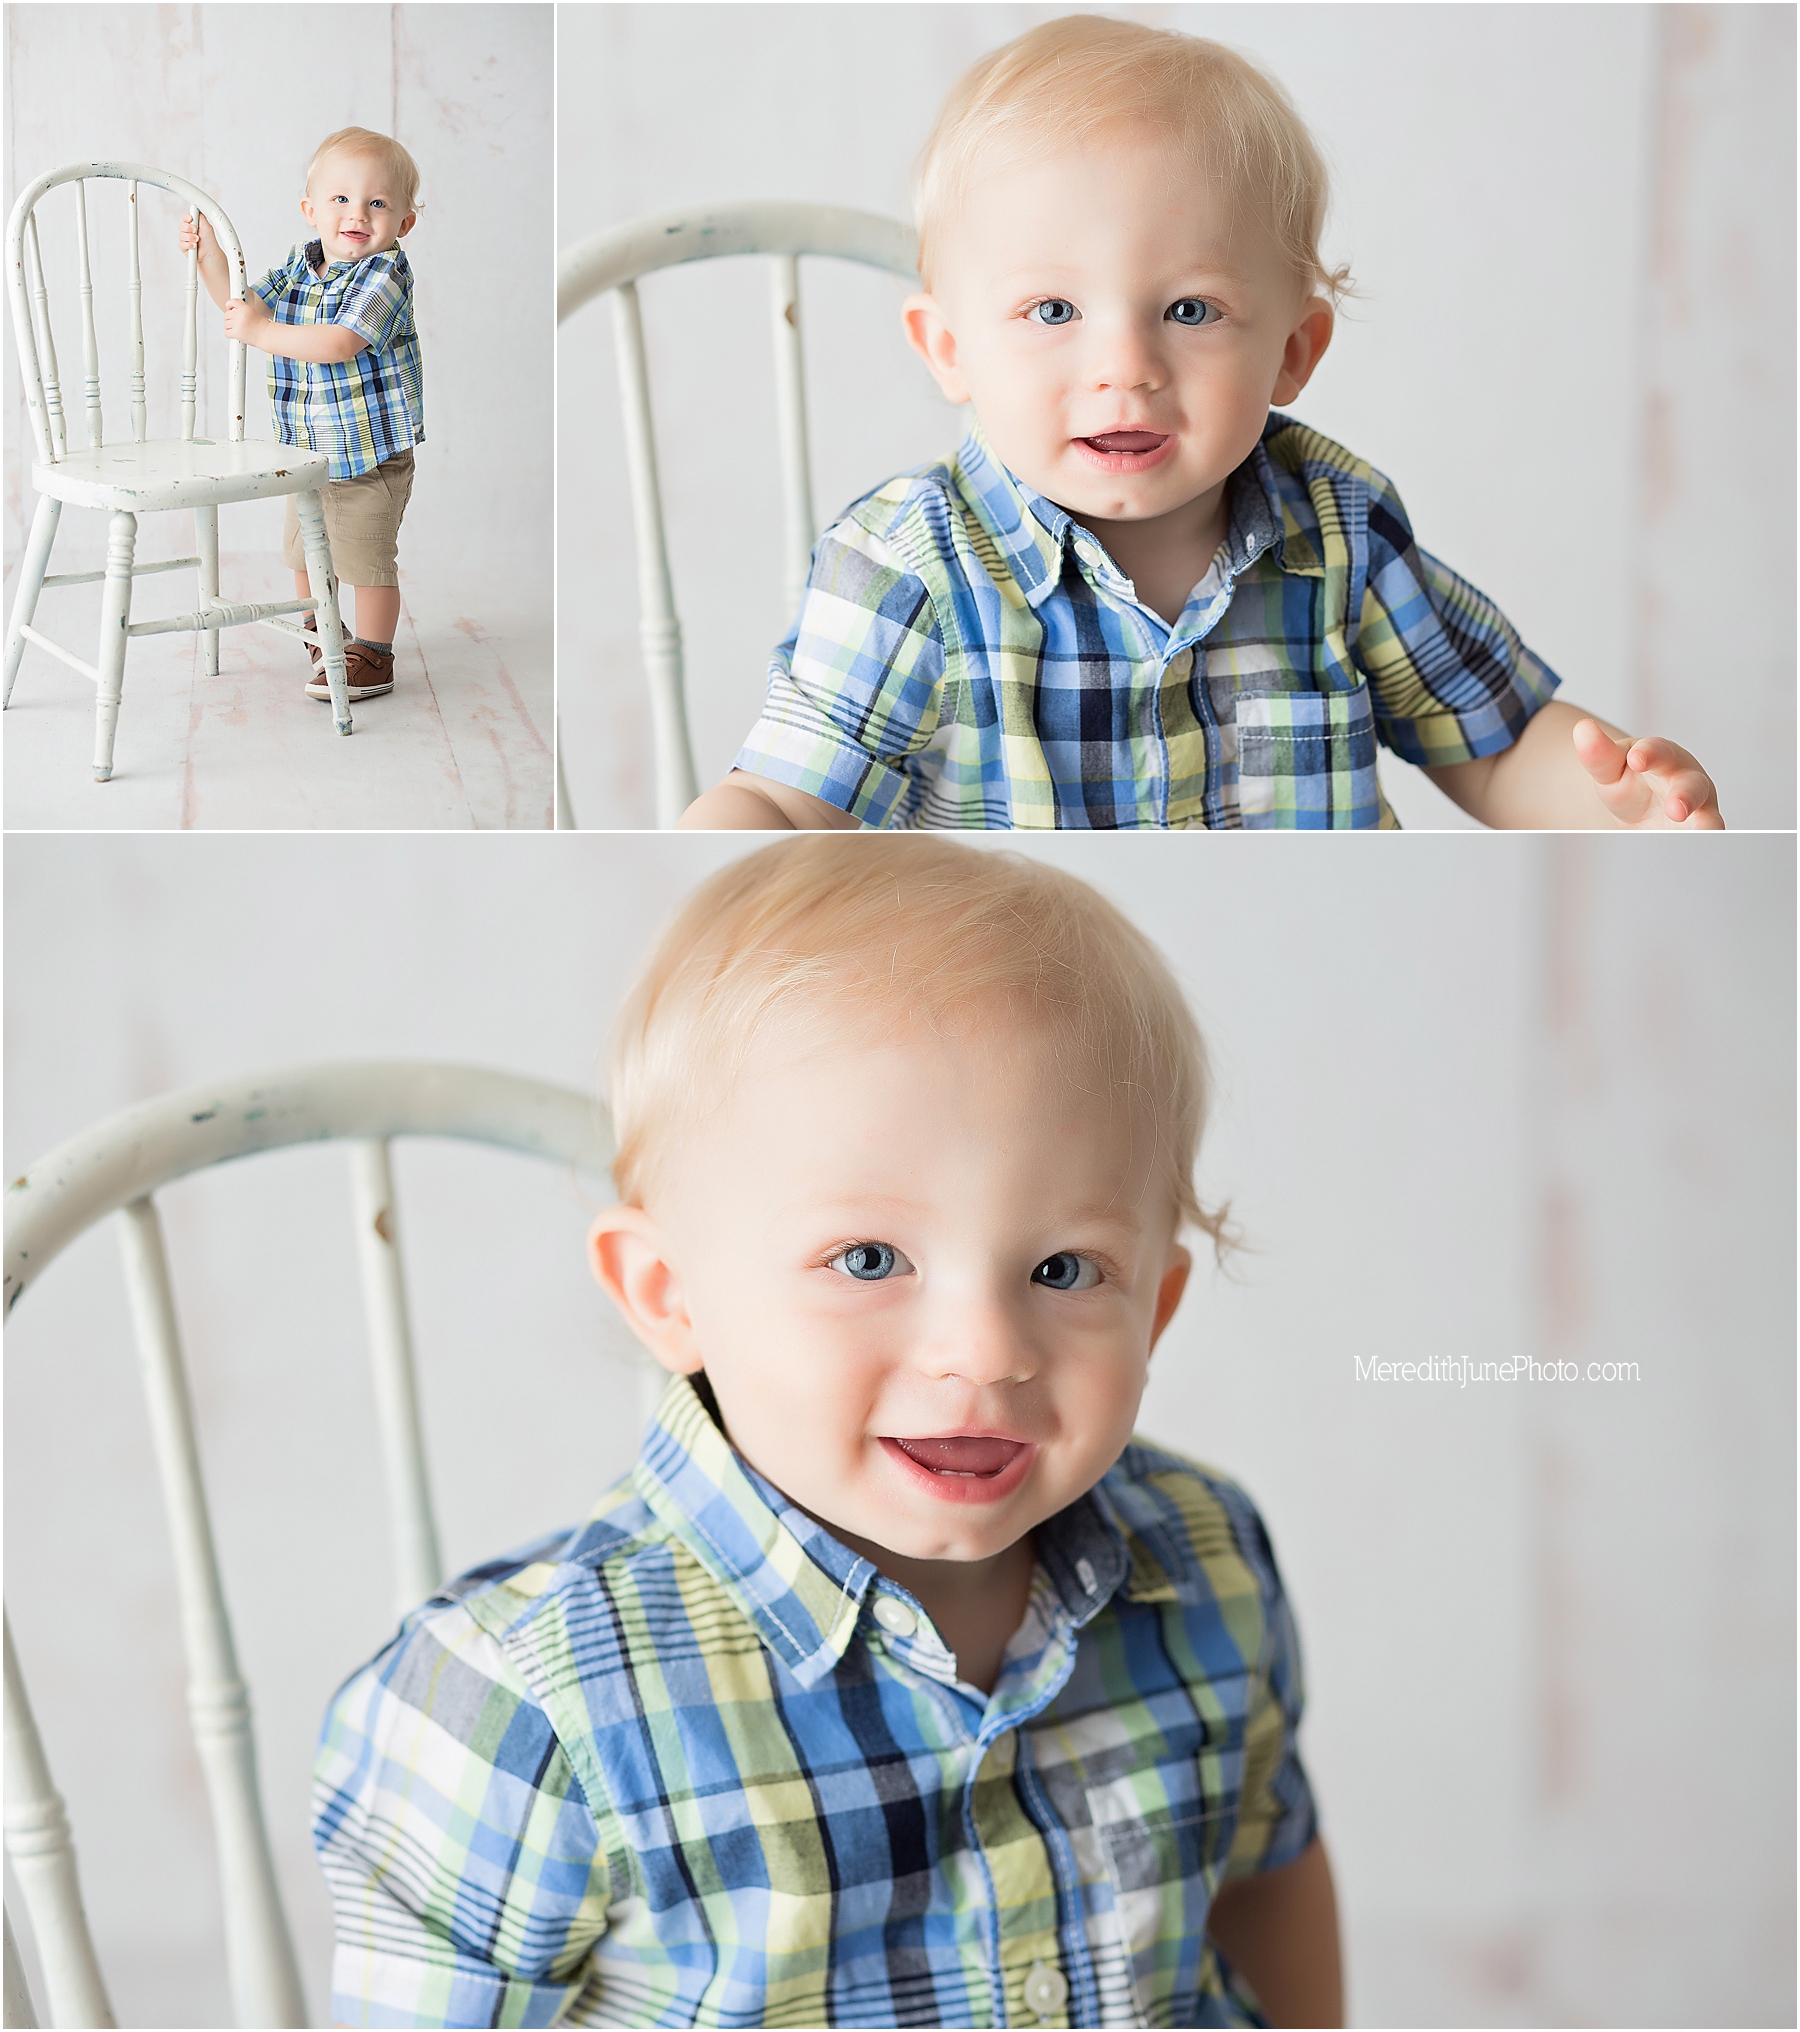 Ledger's cake smash and first birthday session